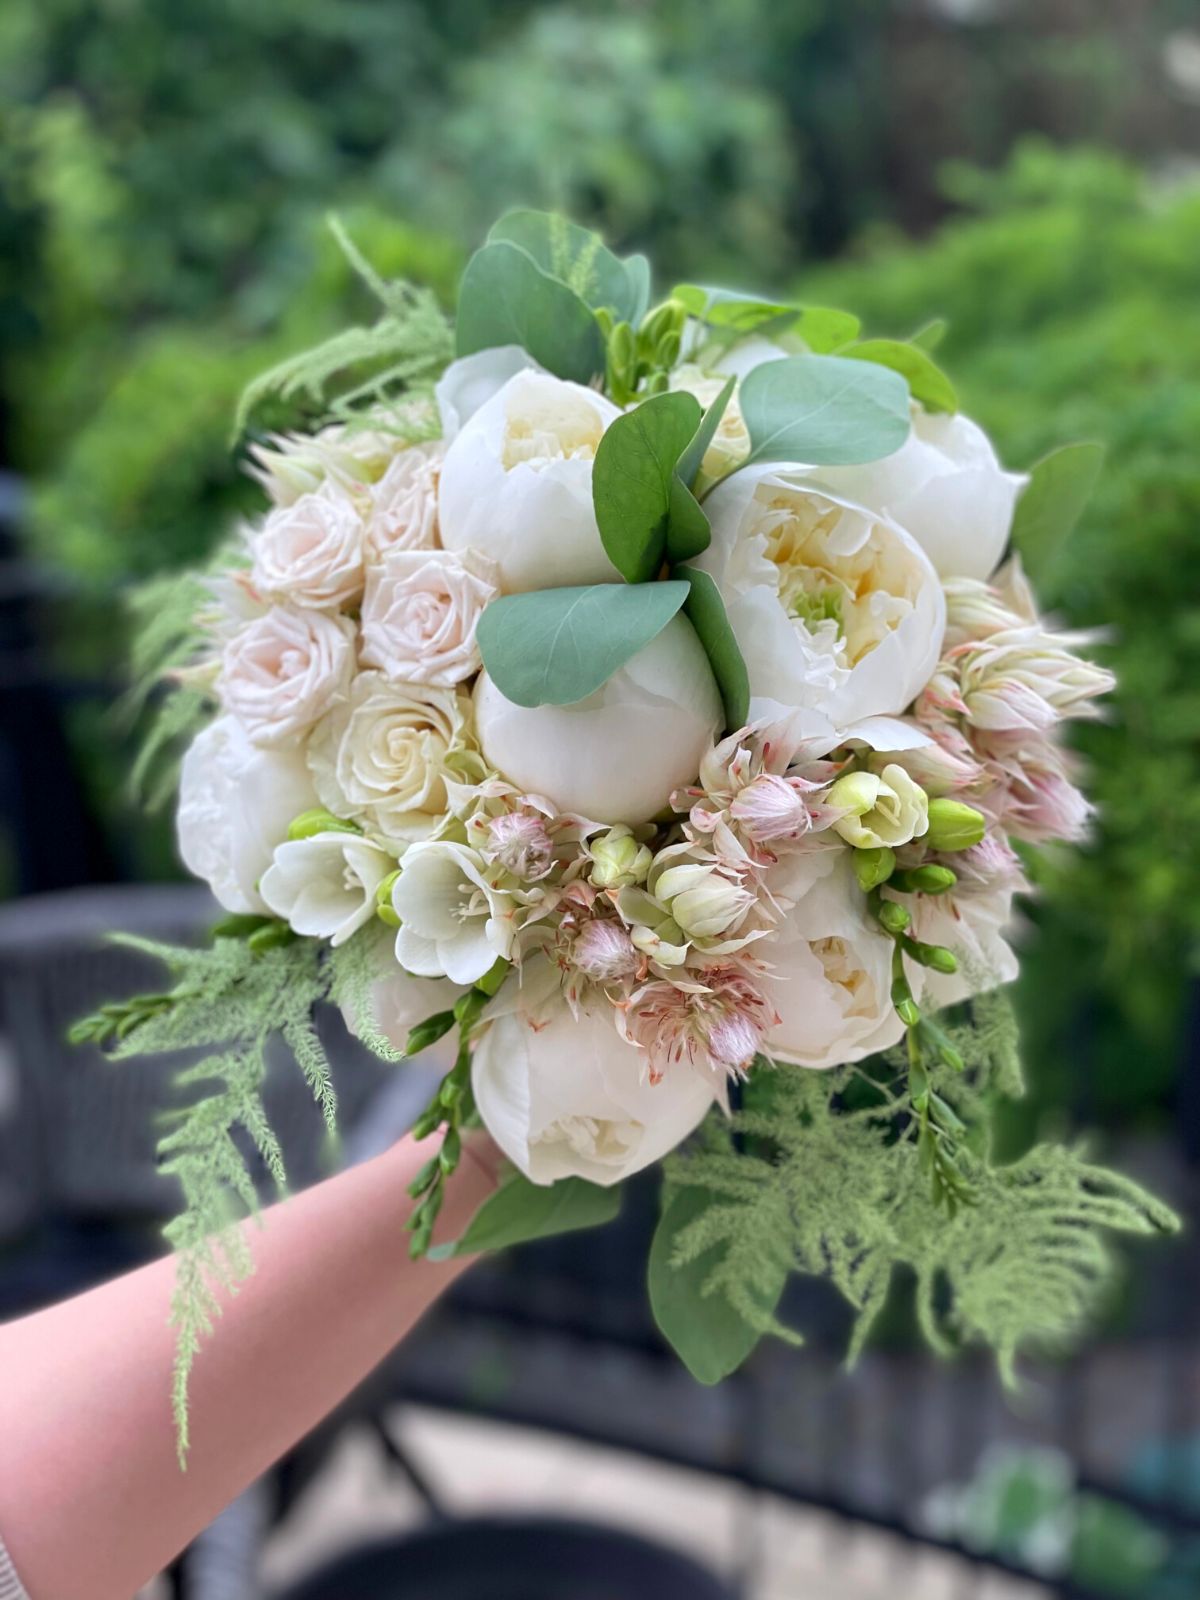 Wedding Bouquet With Protea Blushing Bride, Roses, and Peonies on Thursd - Blog by Kristina Rimiene